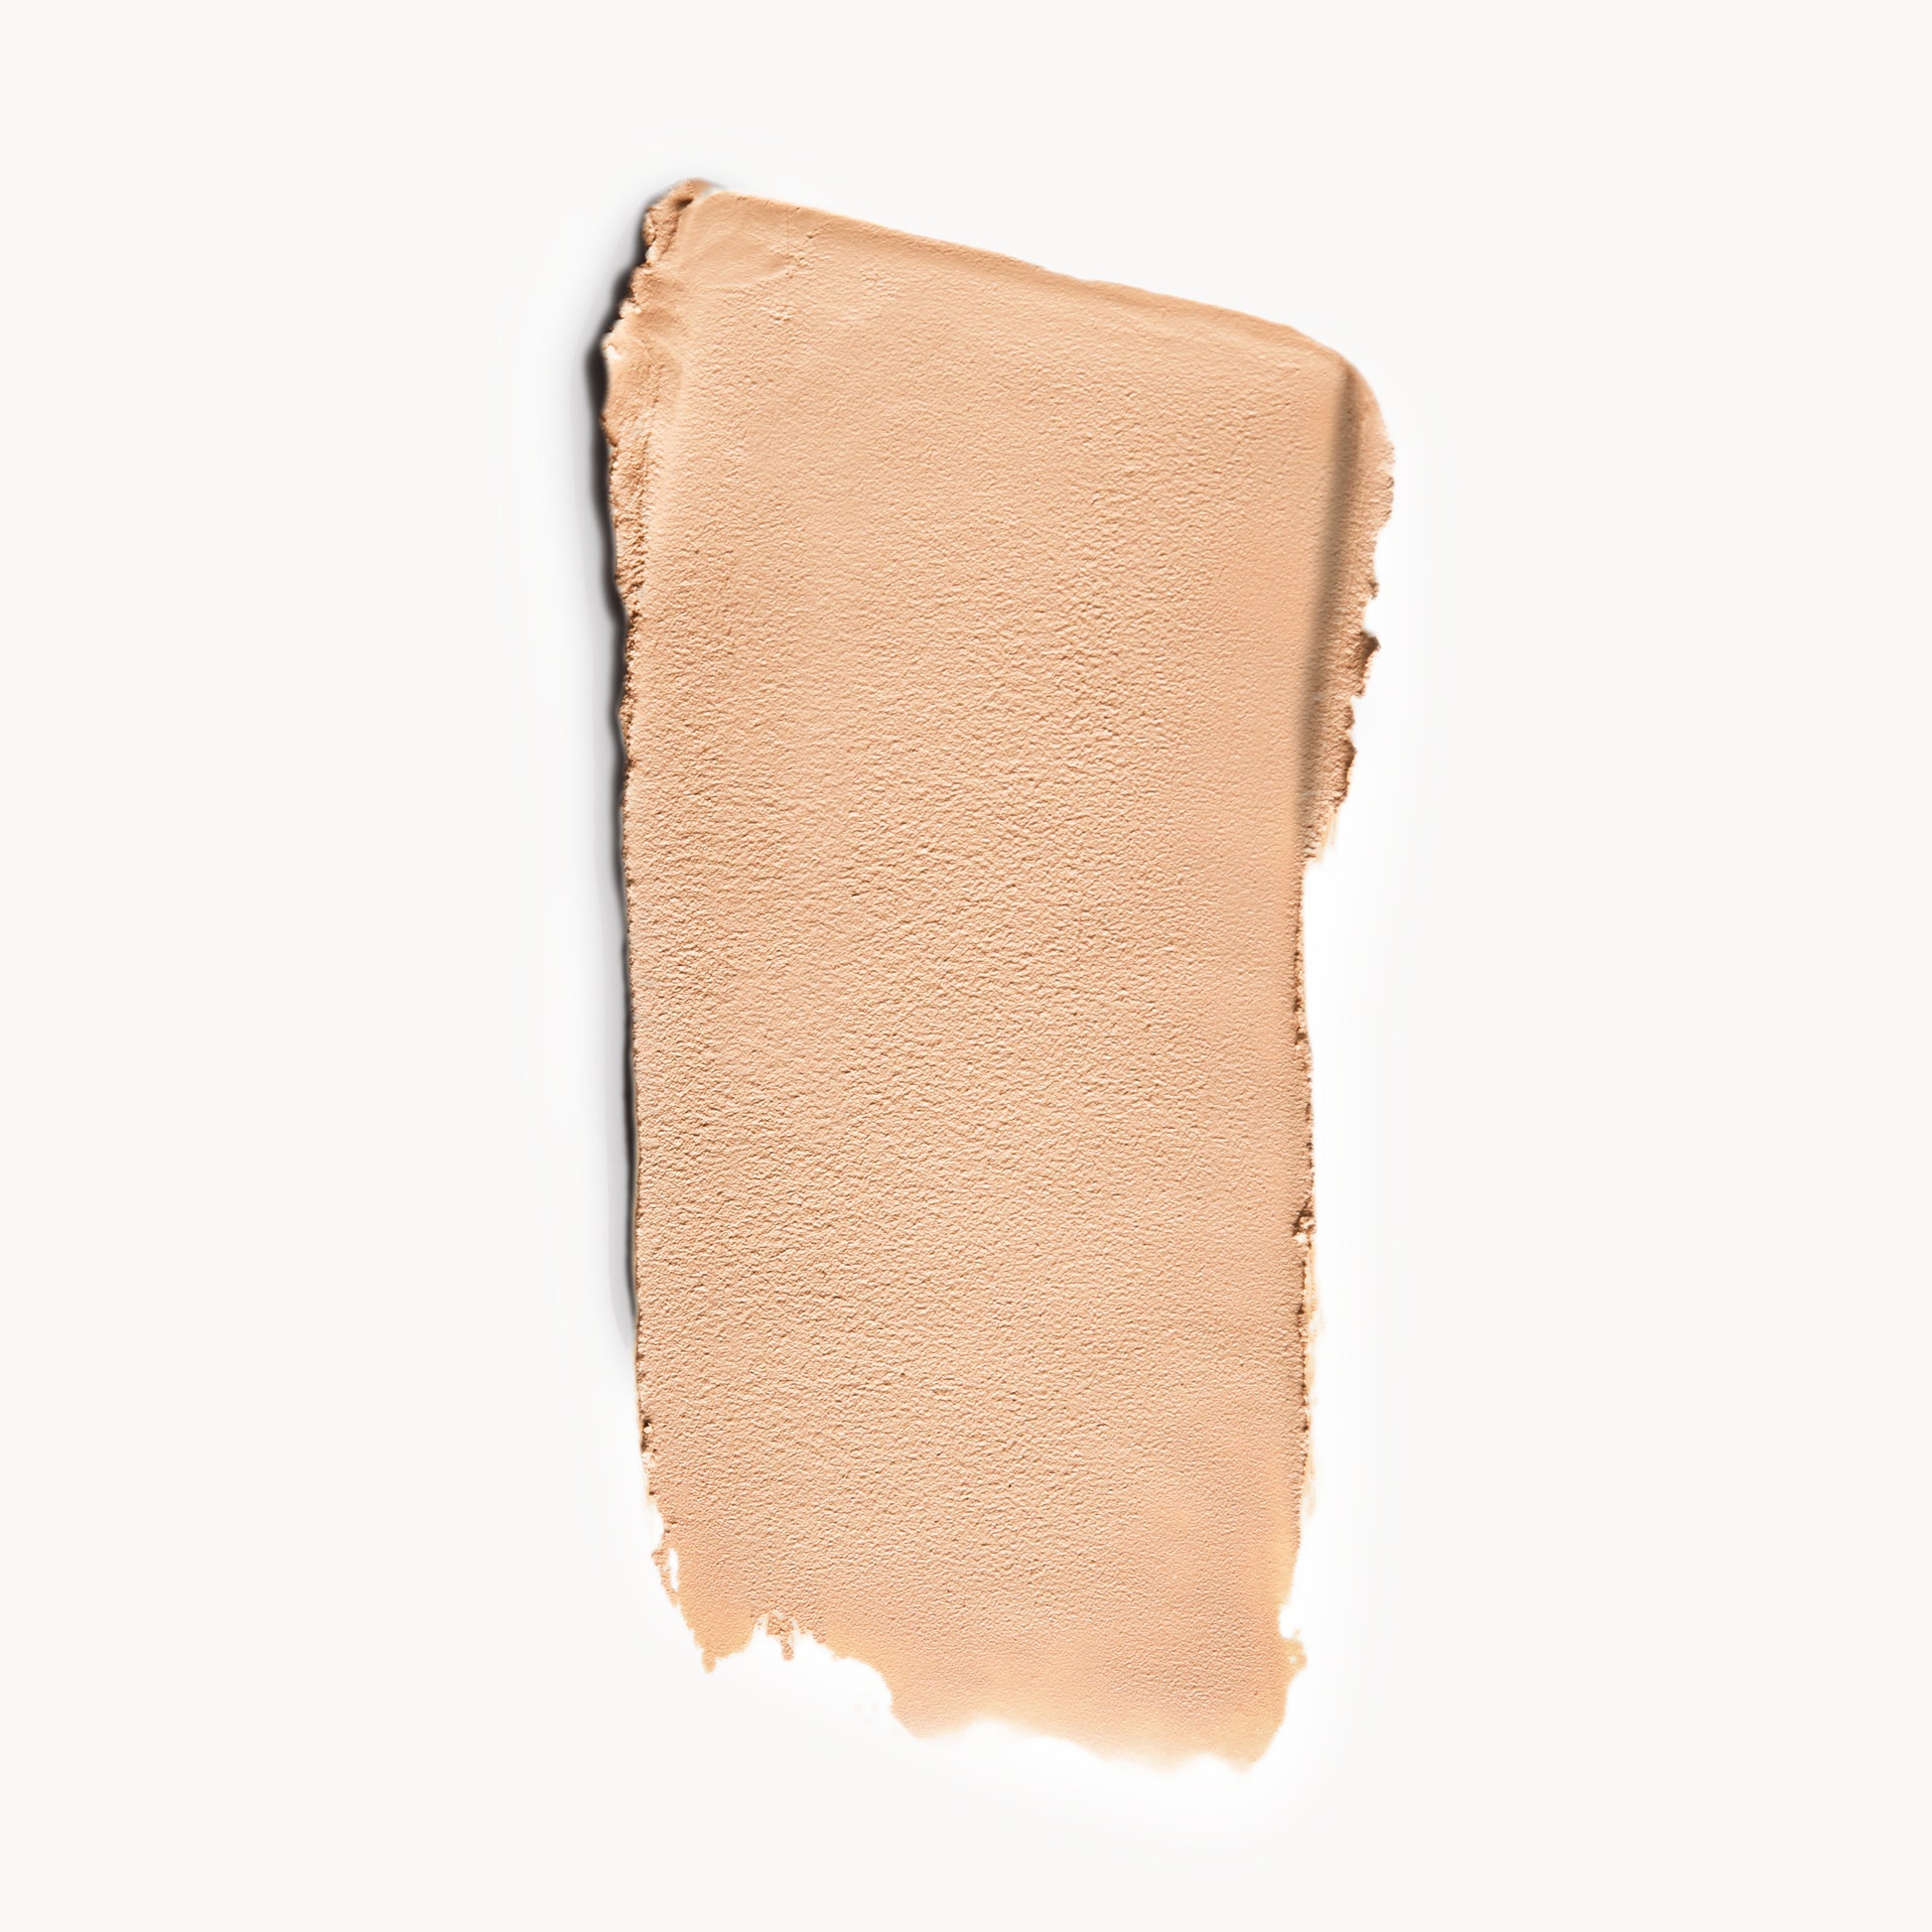 a wipe of fair, neutral-toned cream foundation on a white background